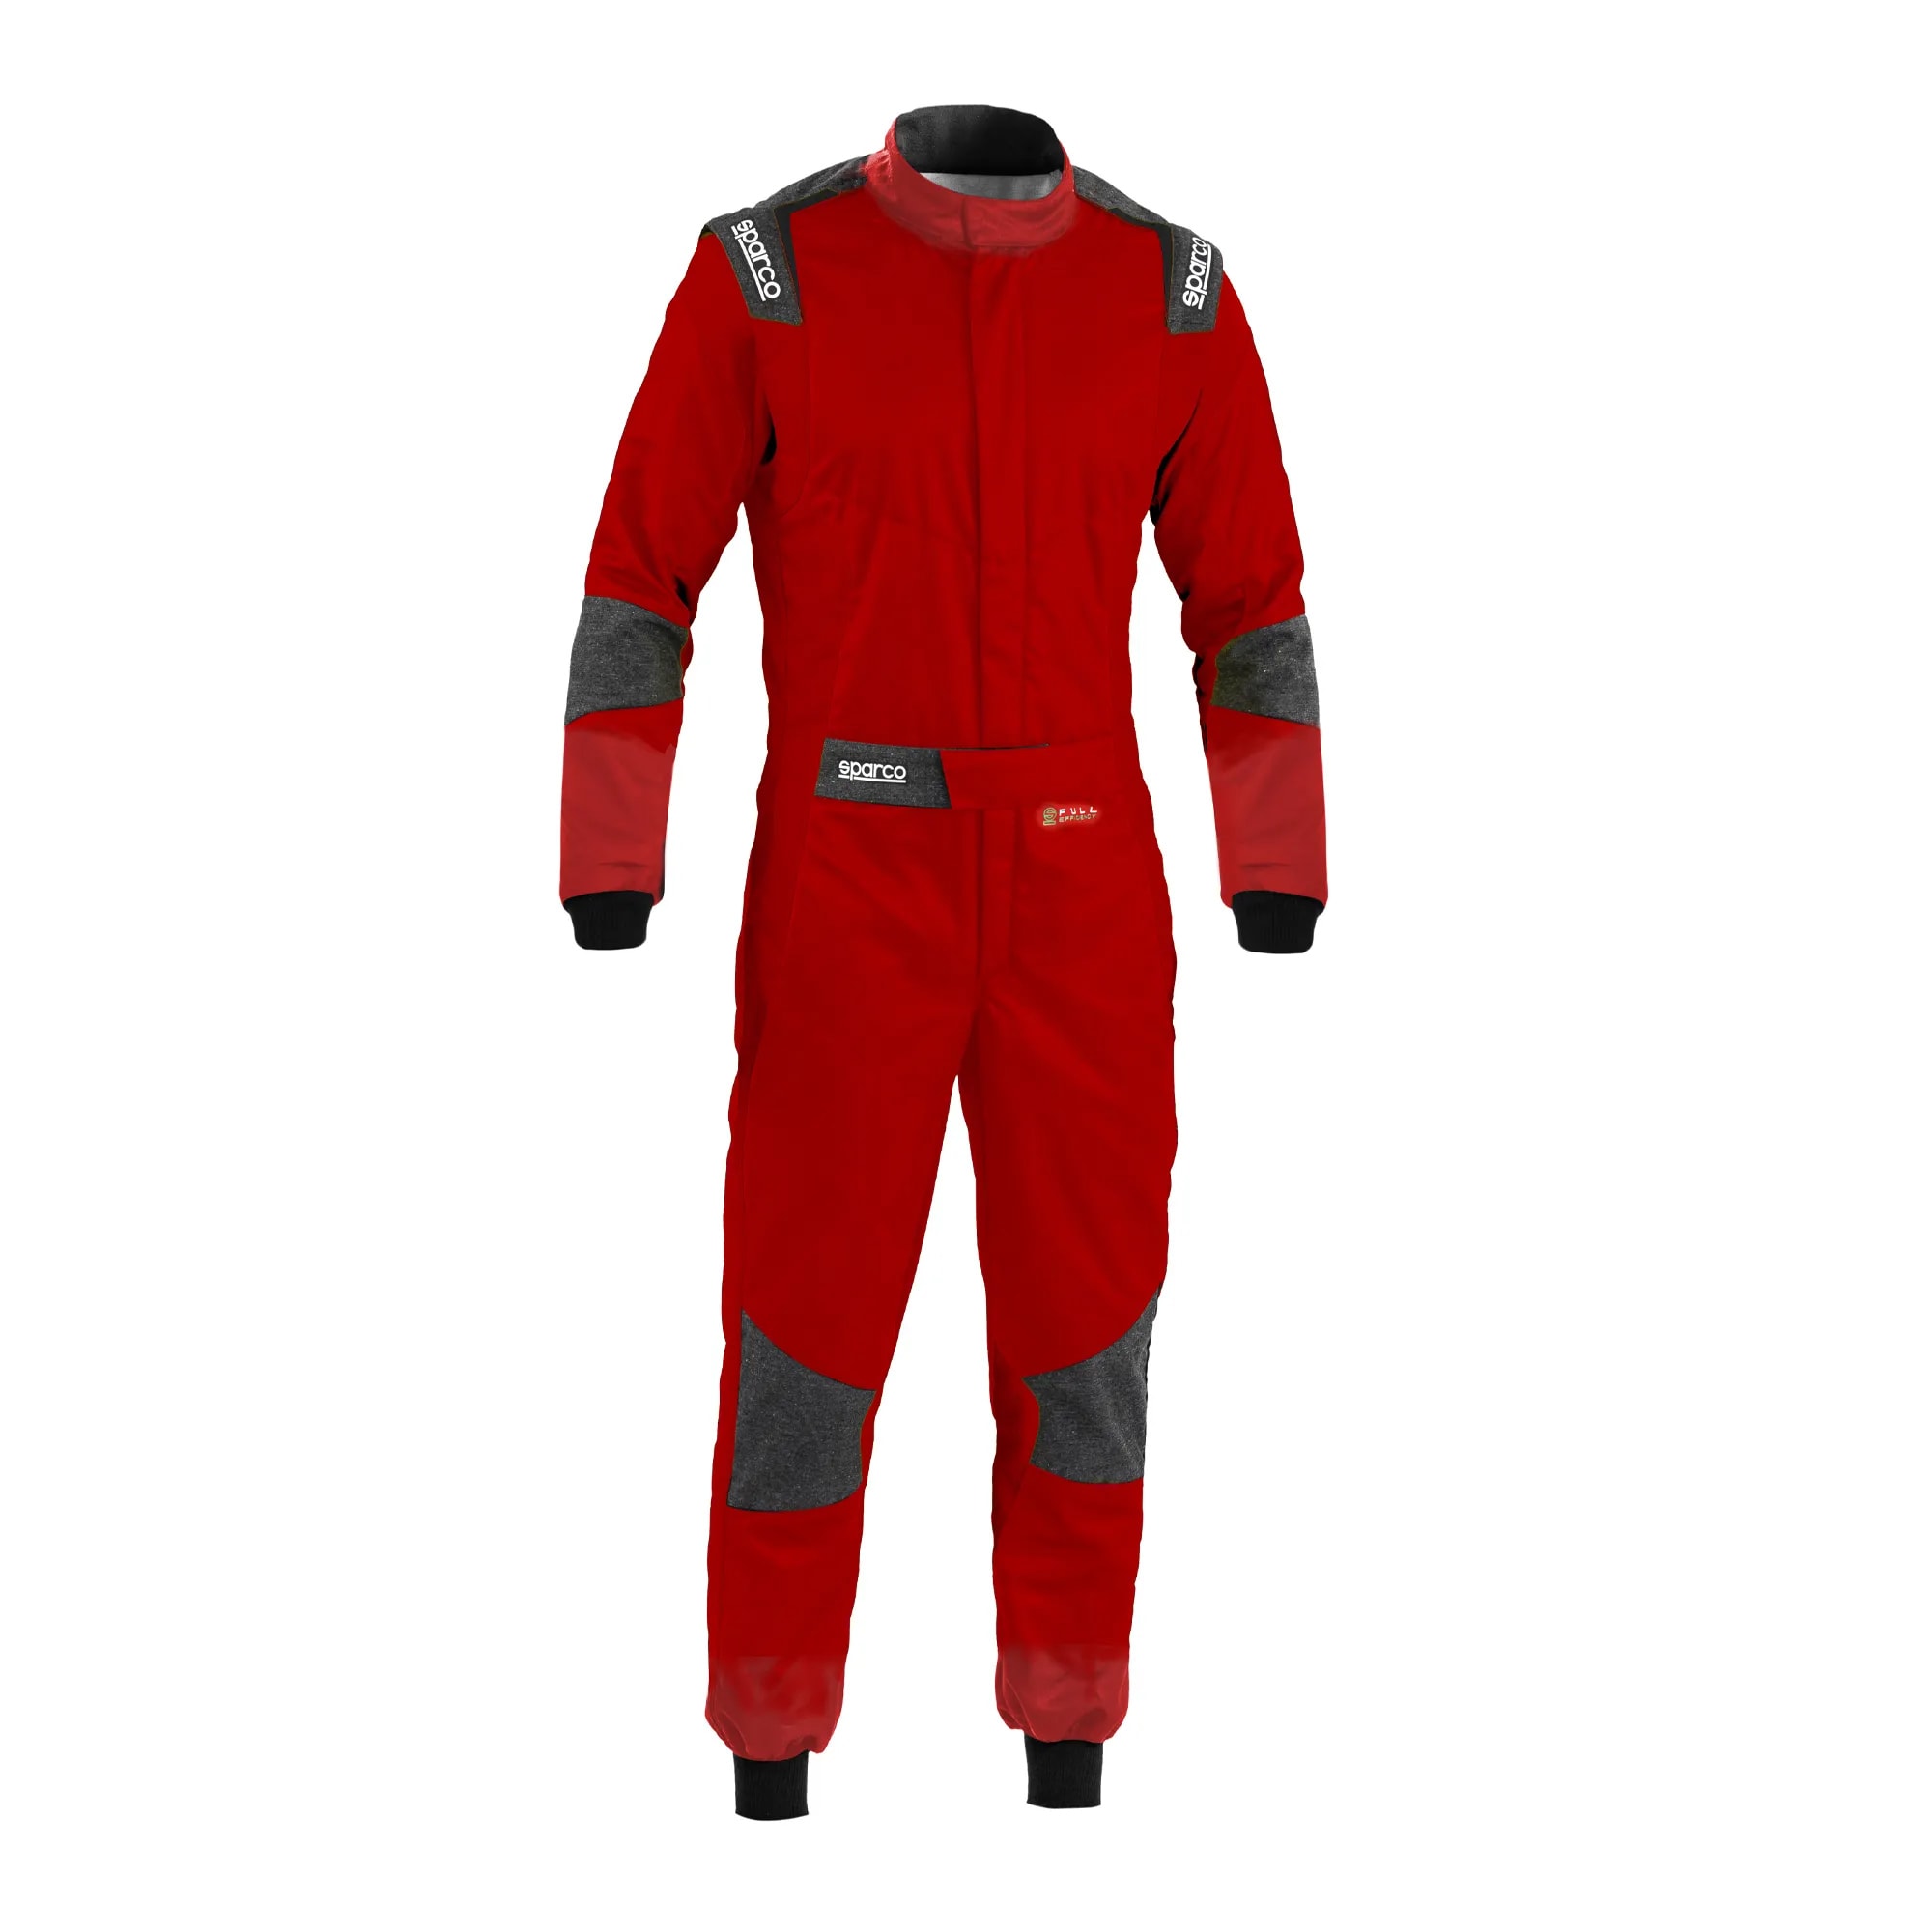 Racing Suit Sparco Futura R579 Red